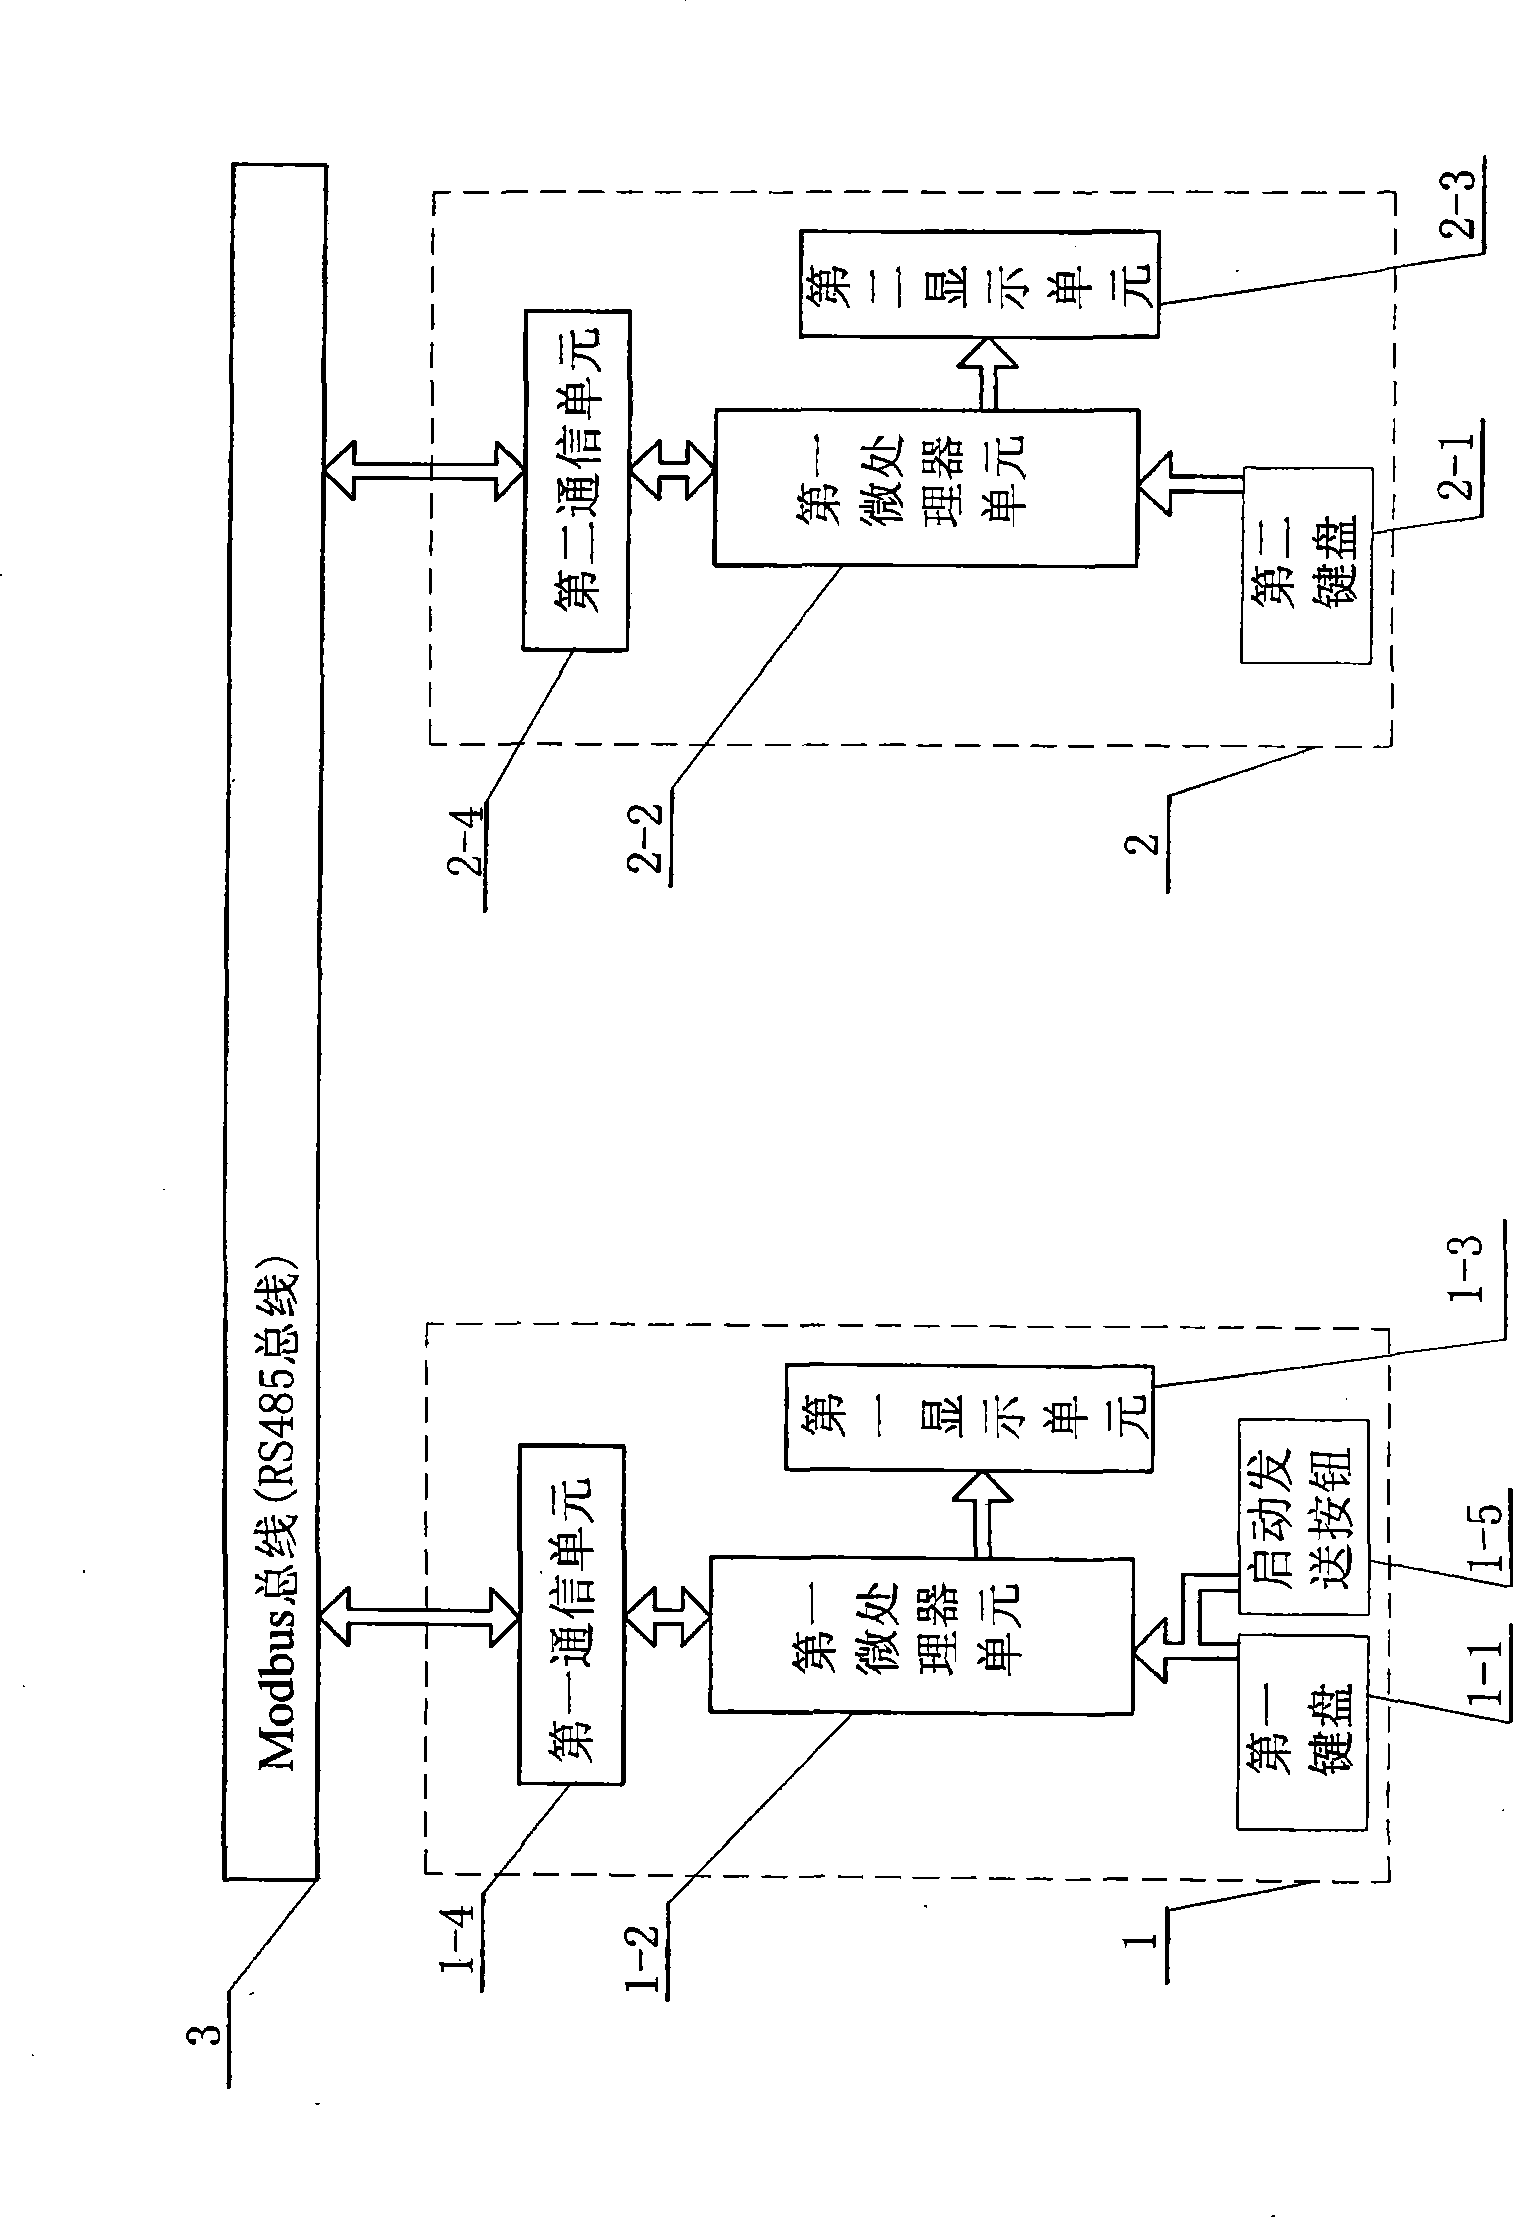 Method for setting up, detecting and displaying interval time of characters inside Modbus RTU frame and between frames